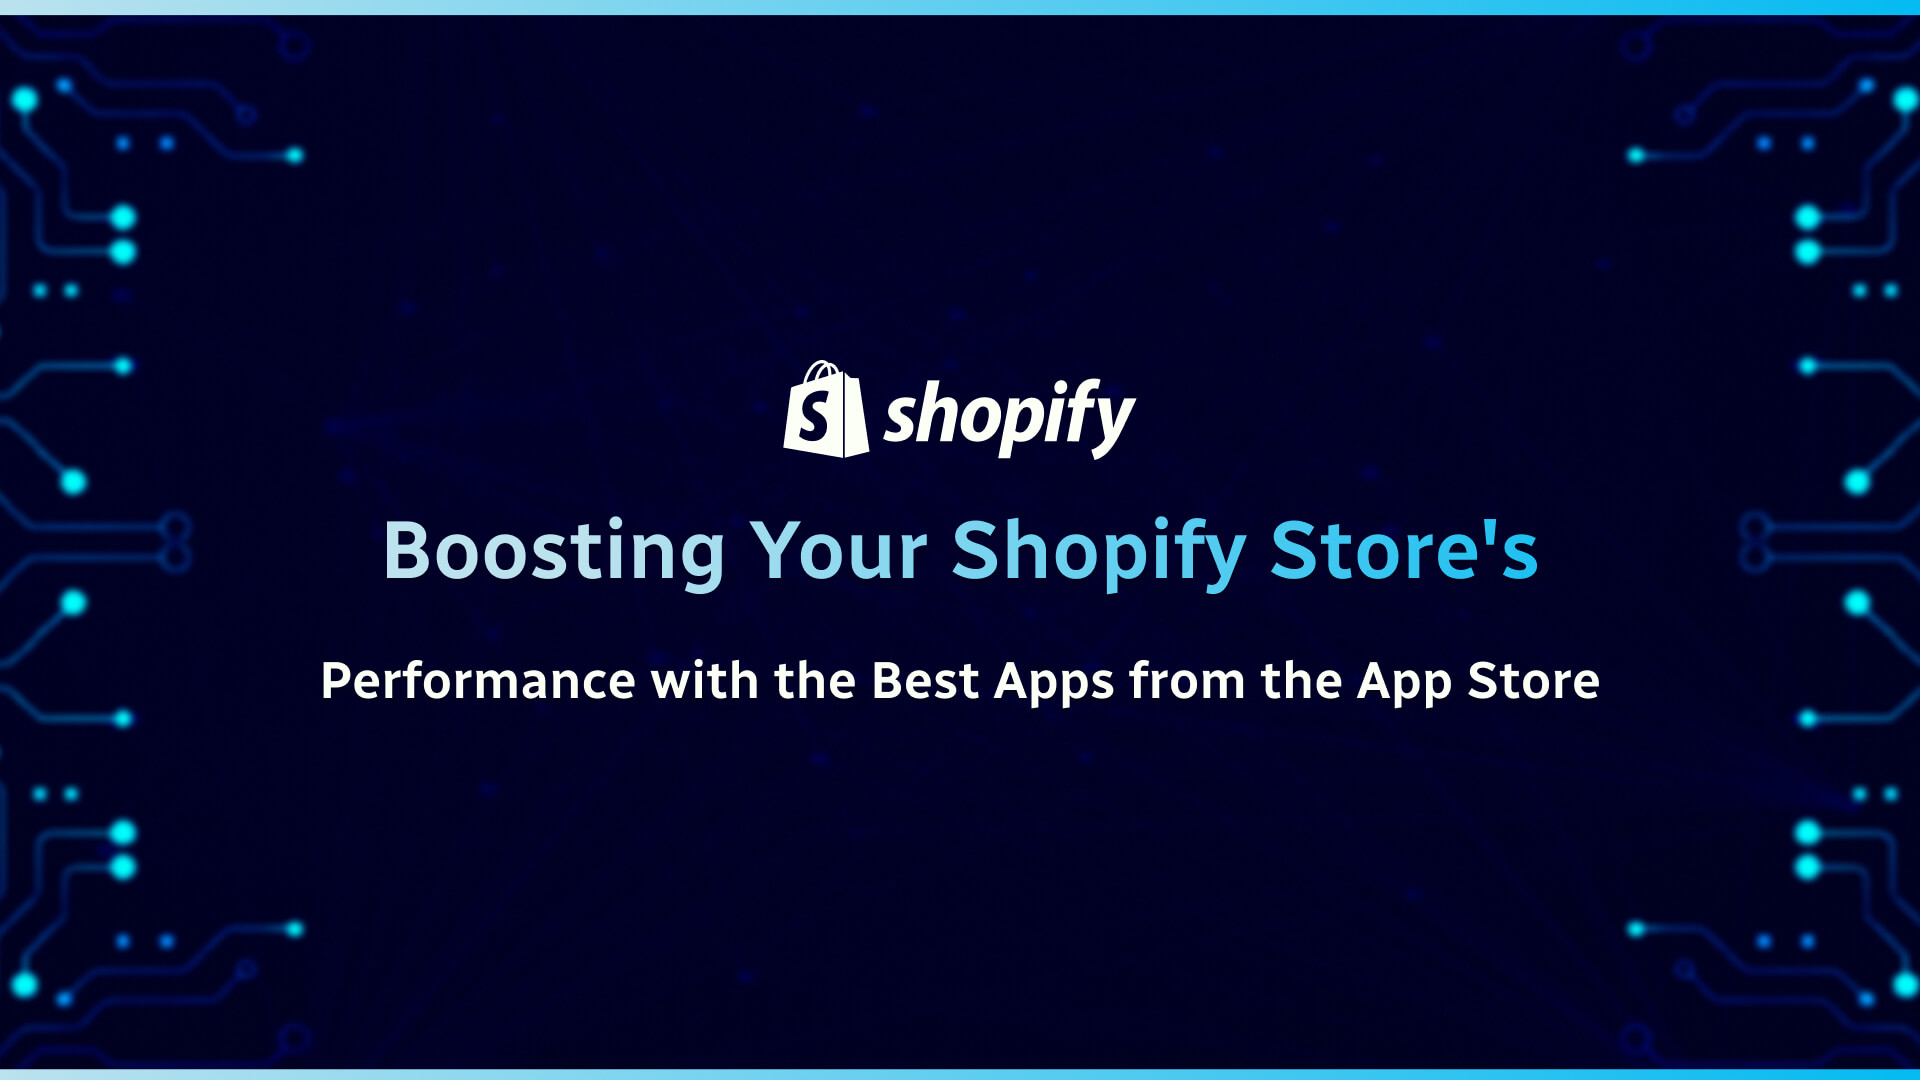 Boosting Your Shopify Store's Performance with the Best Apps from the App Store